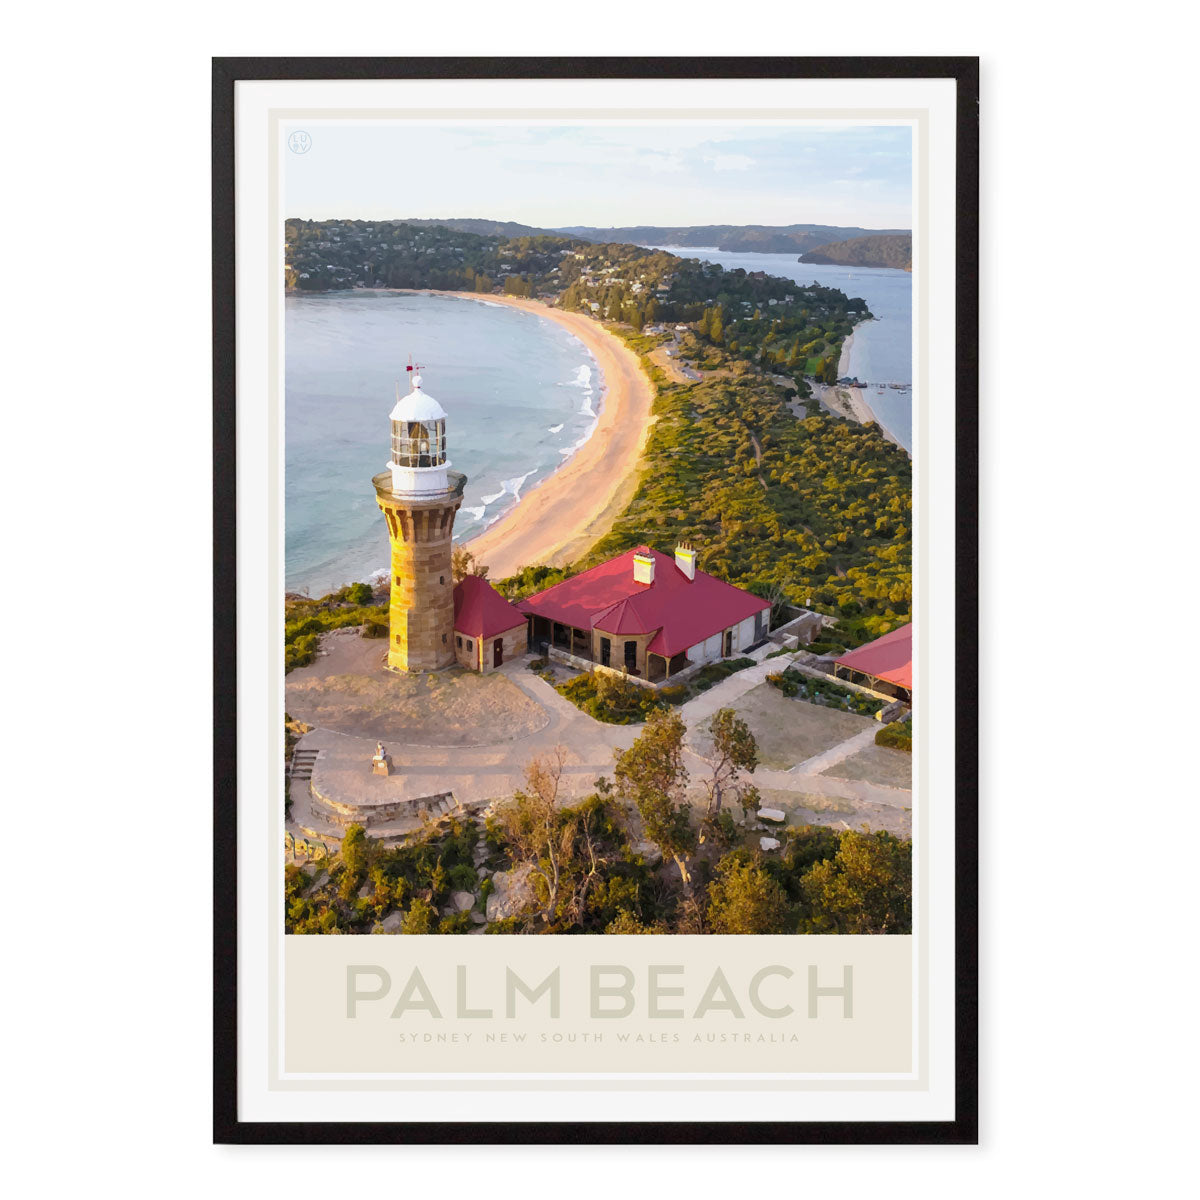 Palm Beach retro vintage travel poster print in black frame from Places We Luv